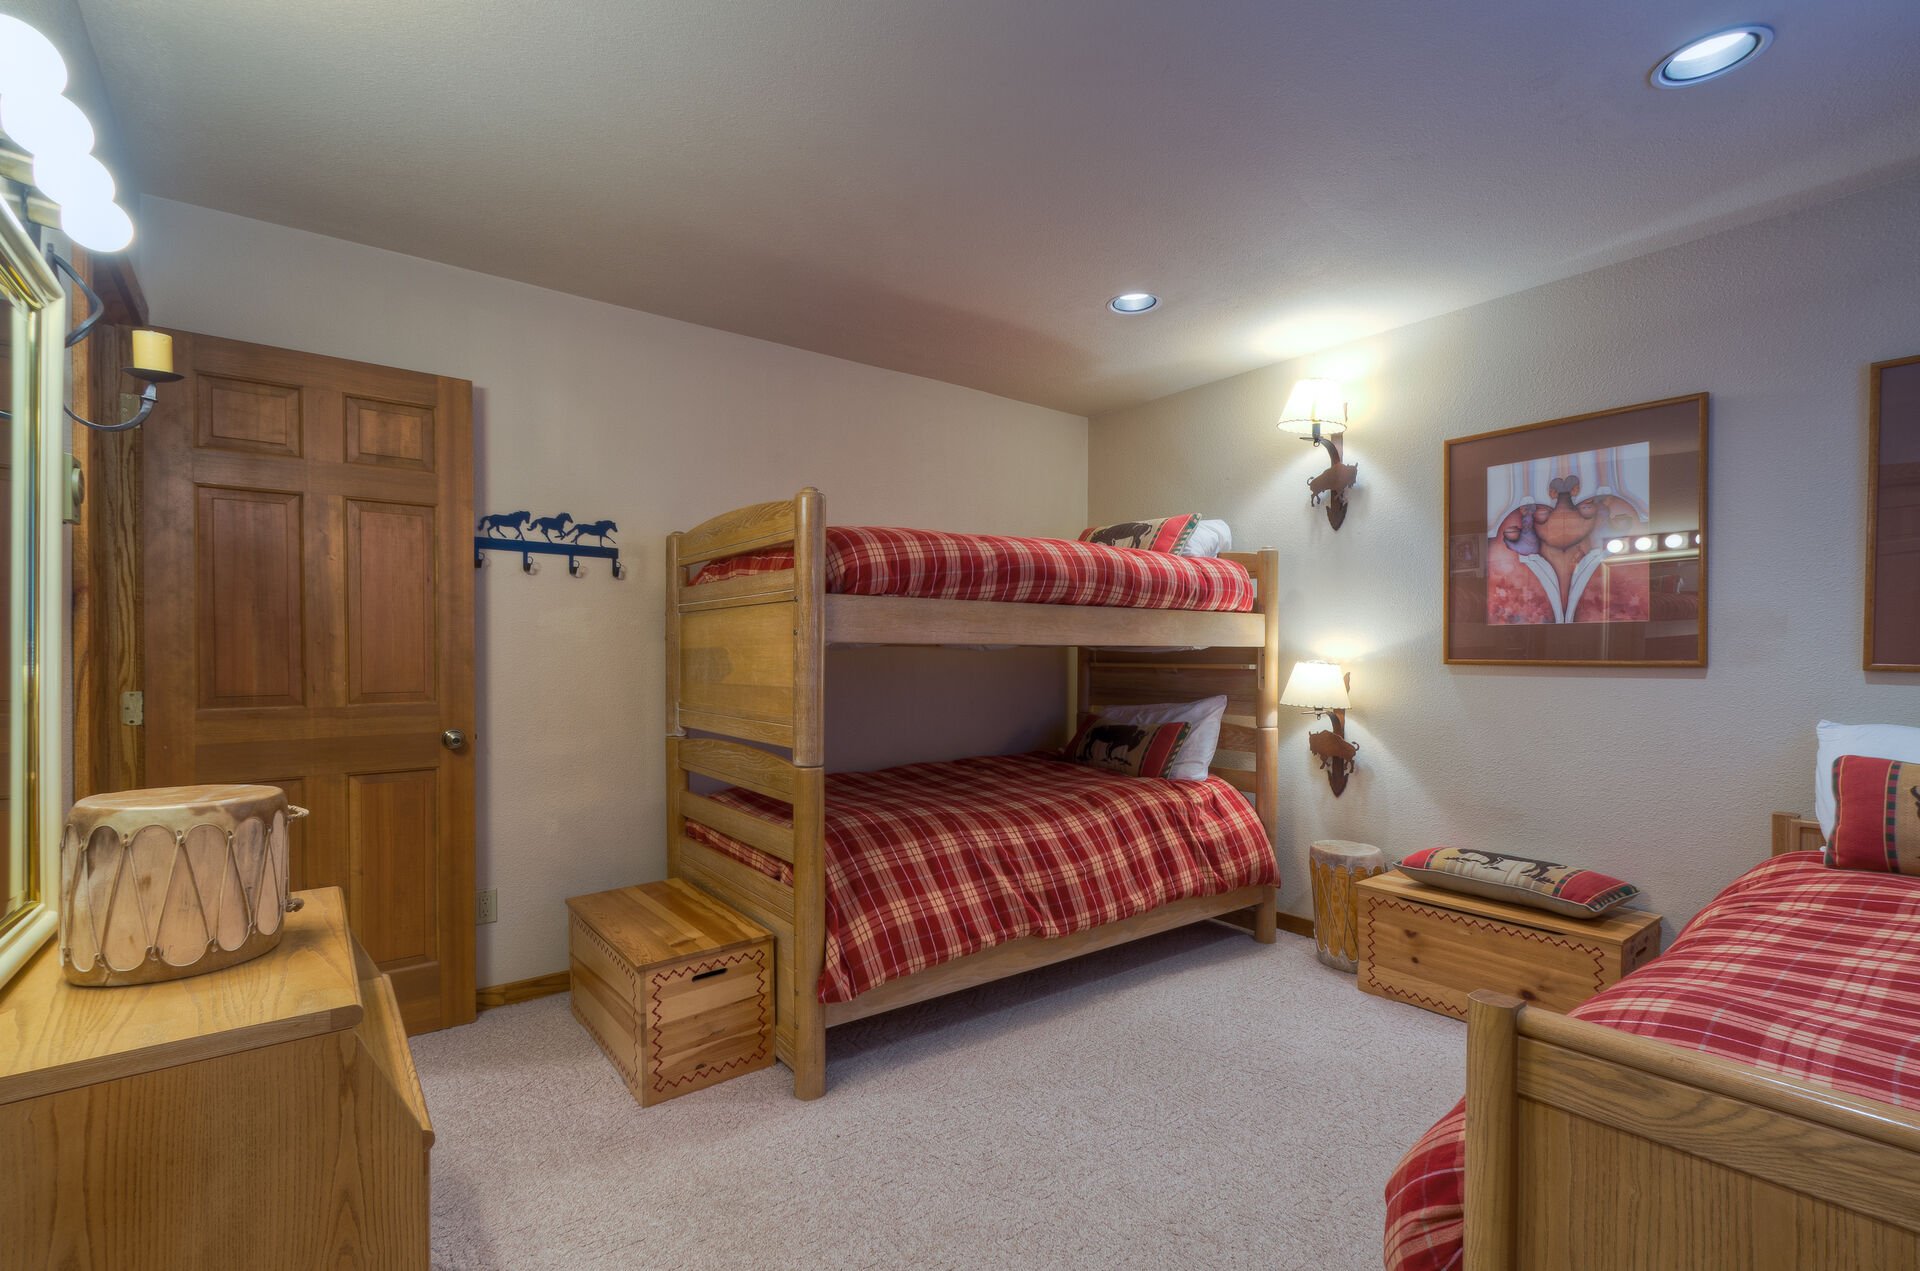 Bunk beds and a single bed with a trundle twin under the single bed.